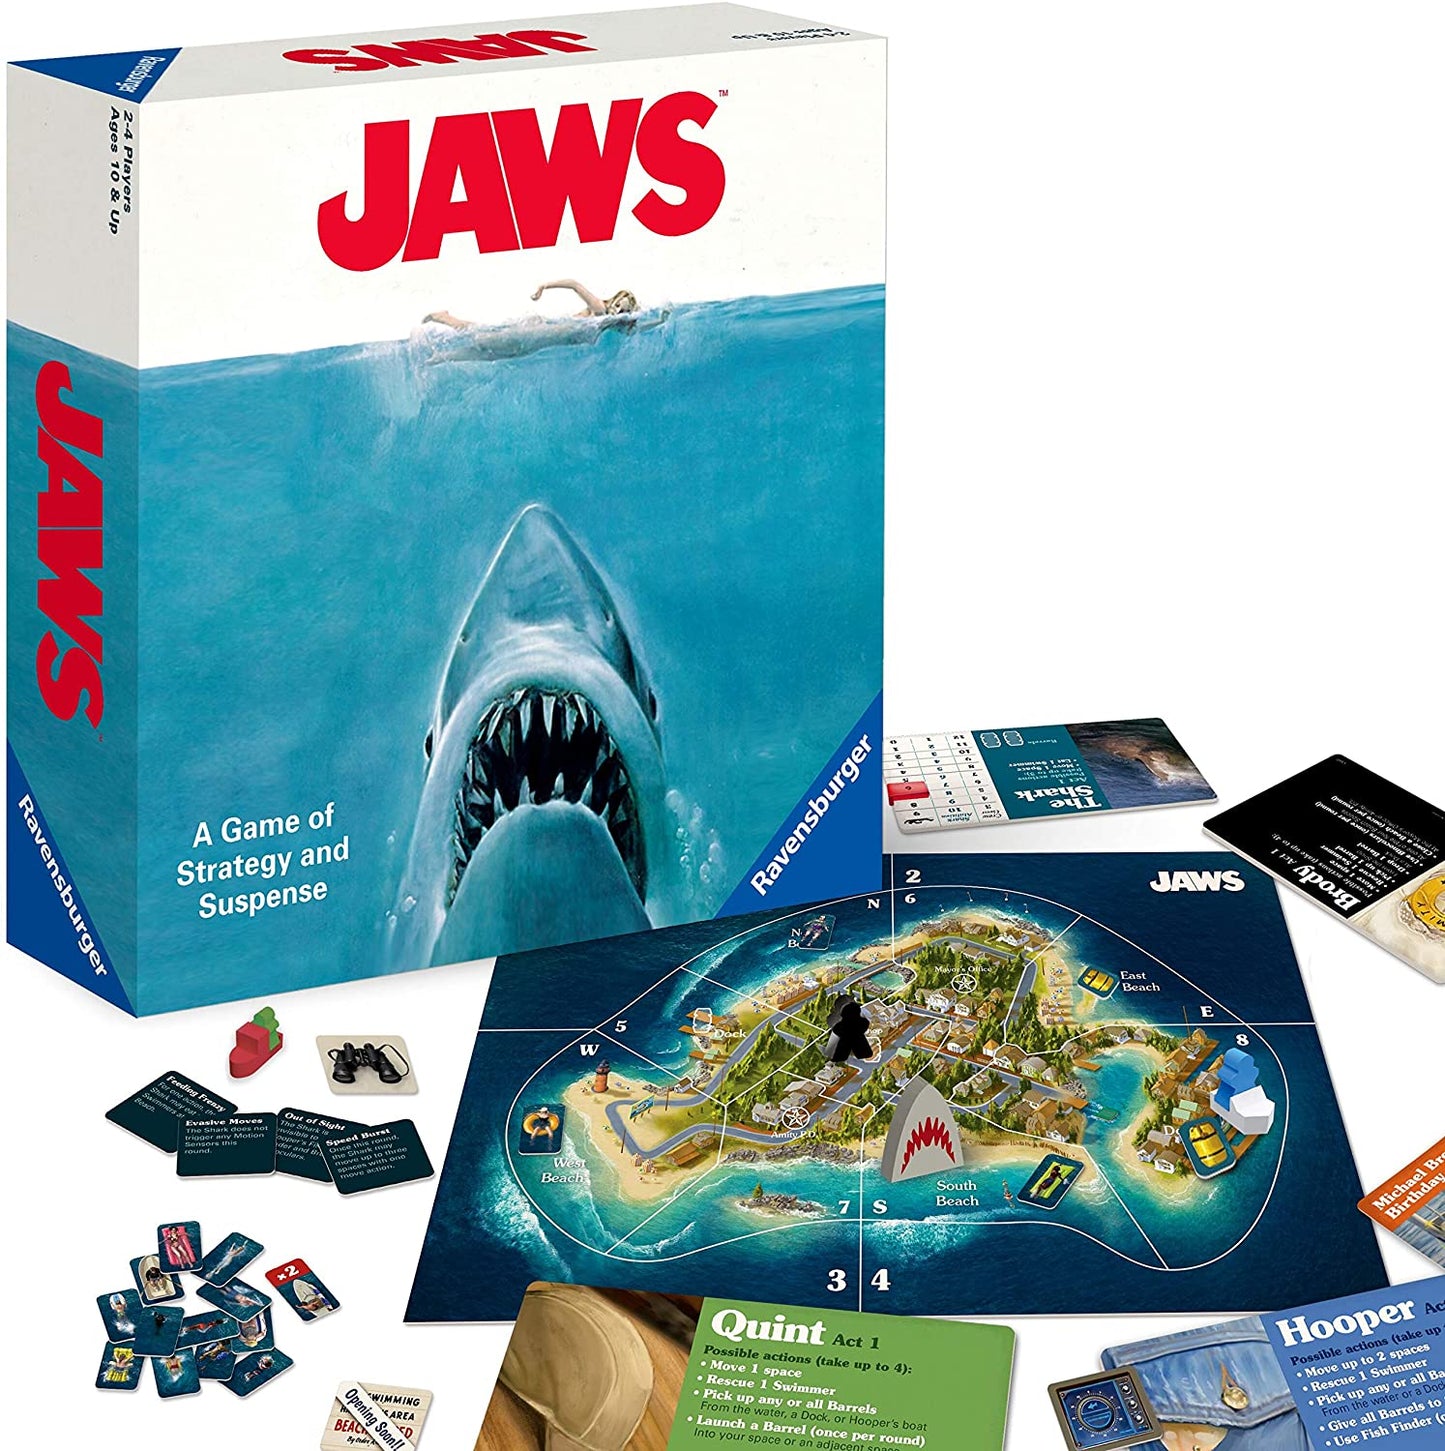 Jaws - Board Game - The Hooded Goblin